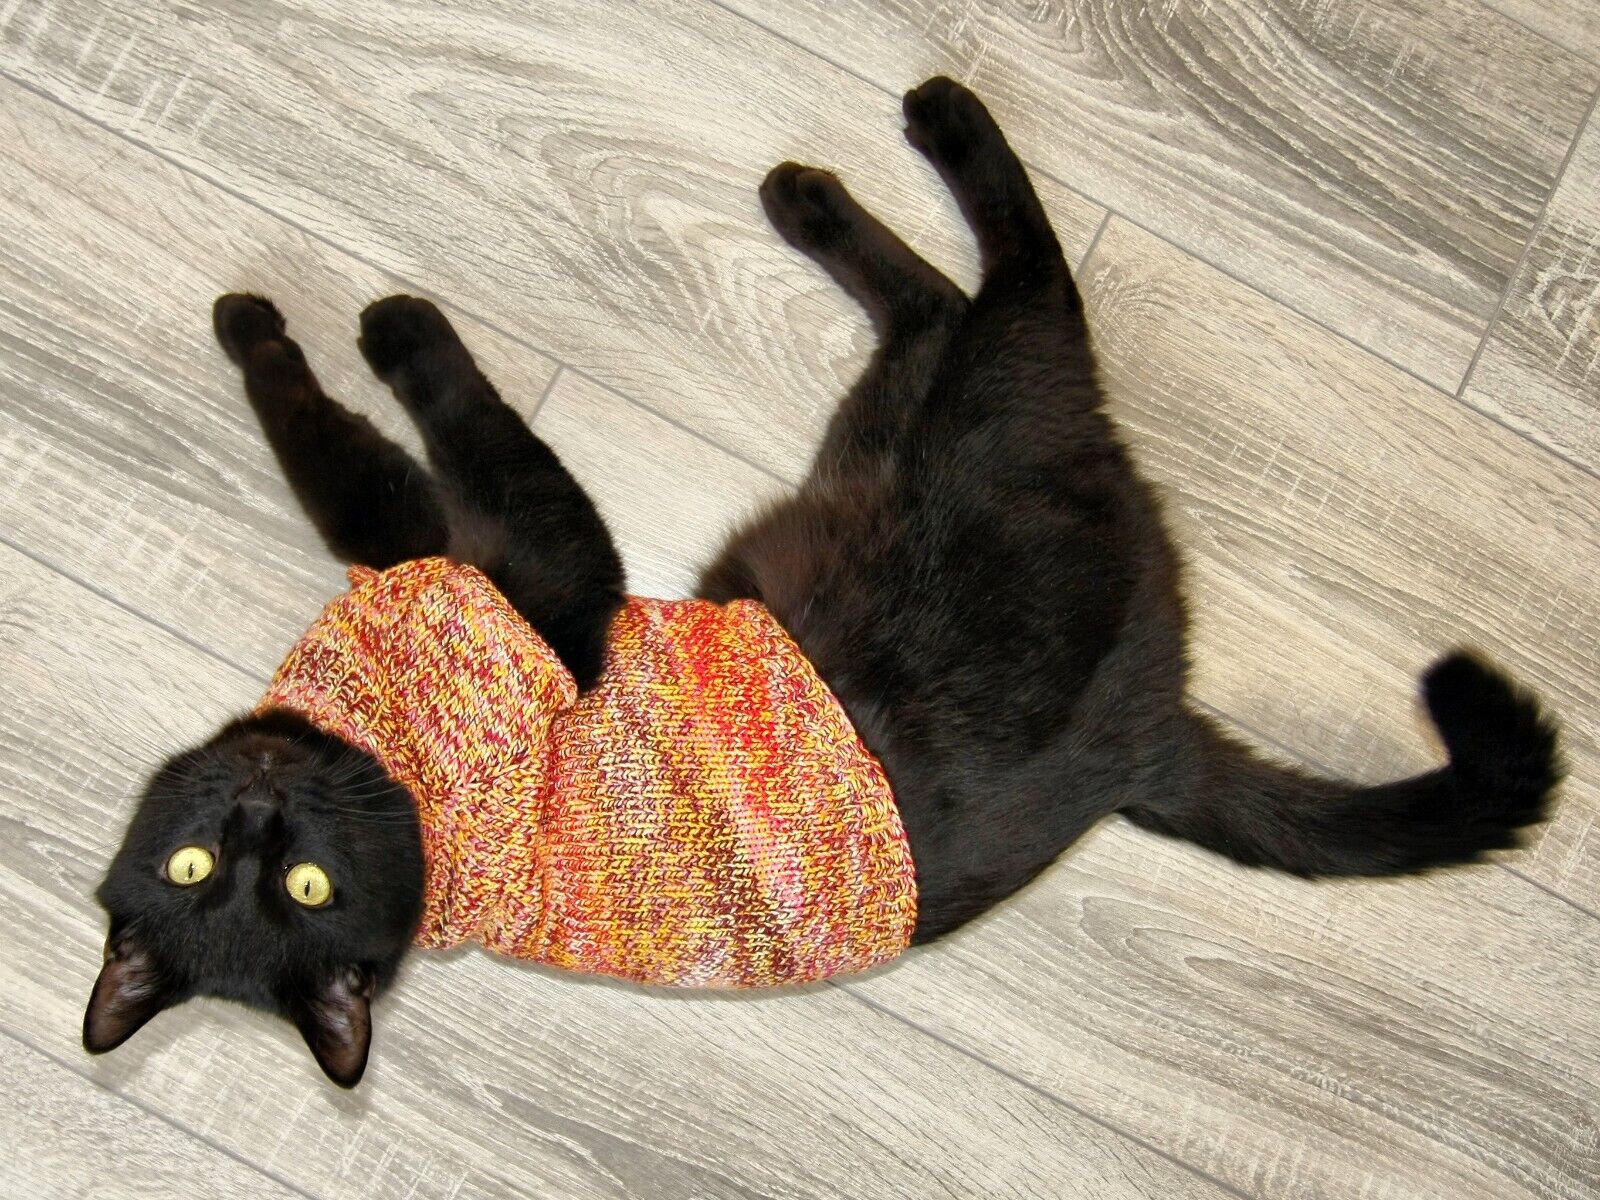 Hand Knitted Cat Sweater "tropical", Handmade Cotton Orange Jumper For Small Dog